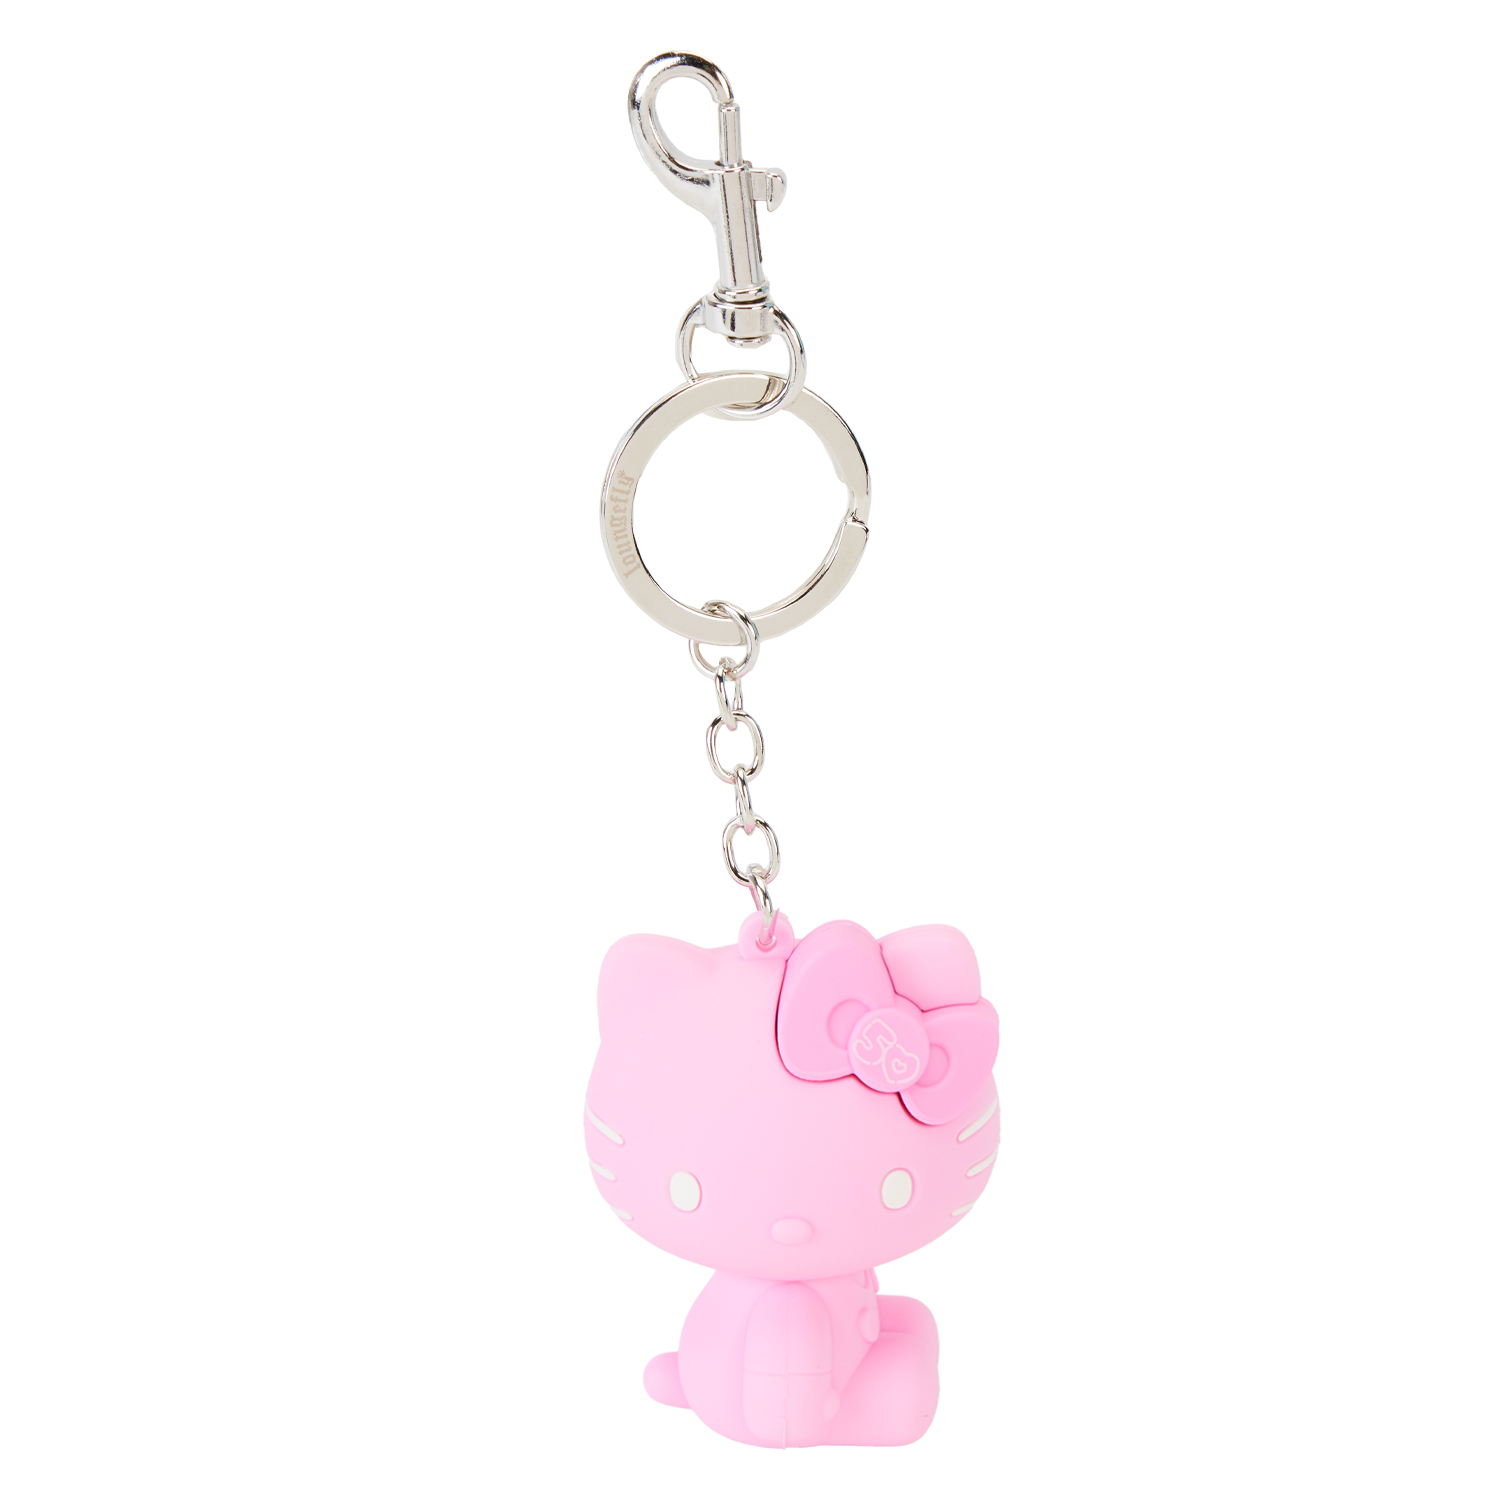 Hello Kitty x Loungefly 50th Anniv. Clear & Cute Keychain Accessory Loungefly   